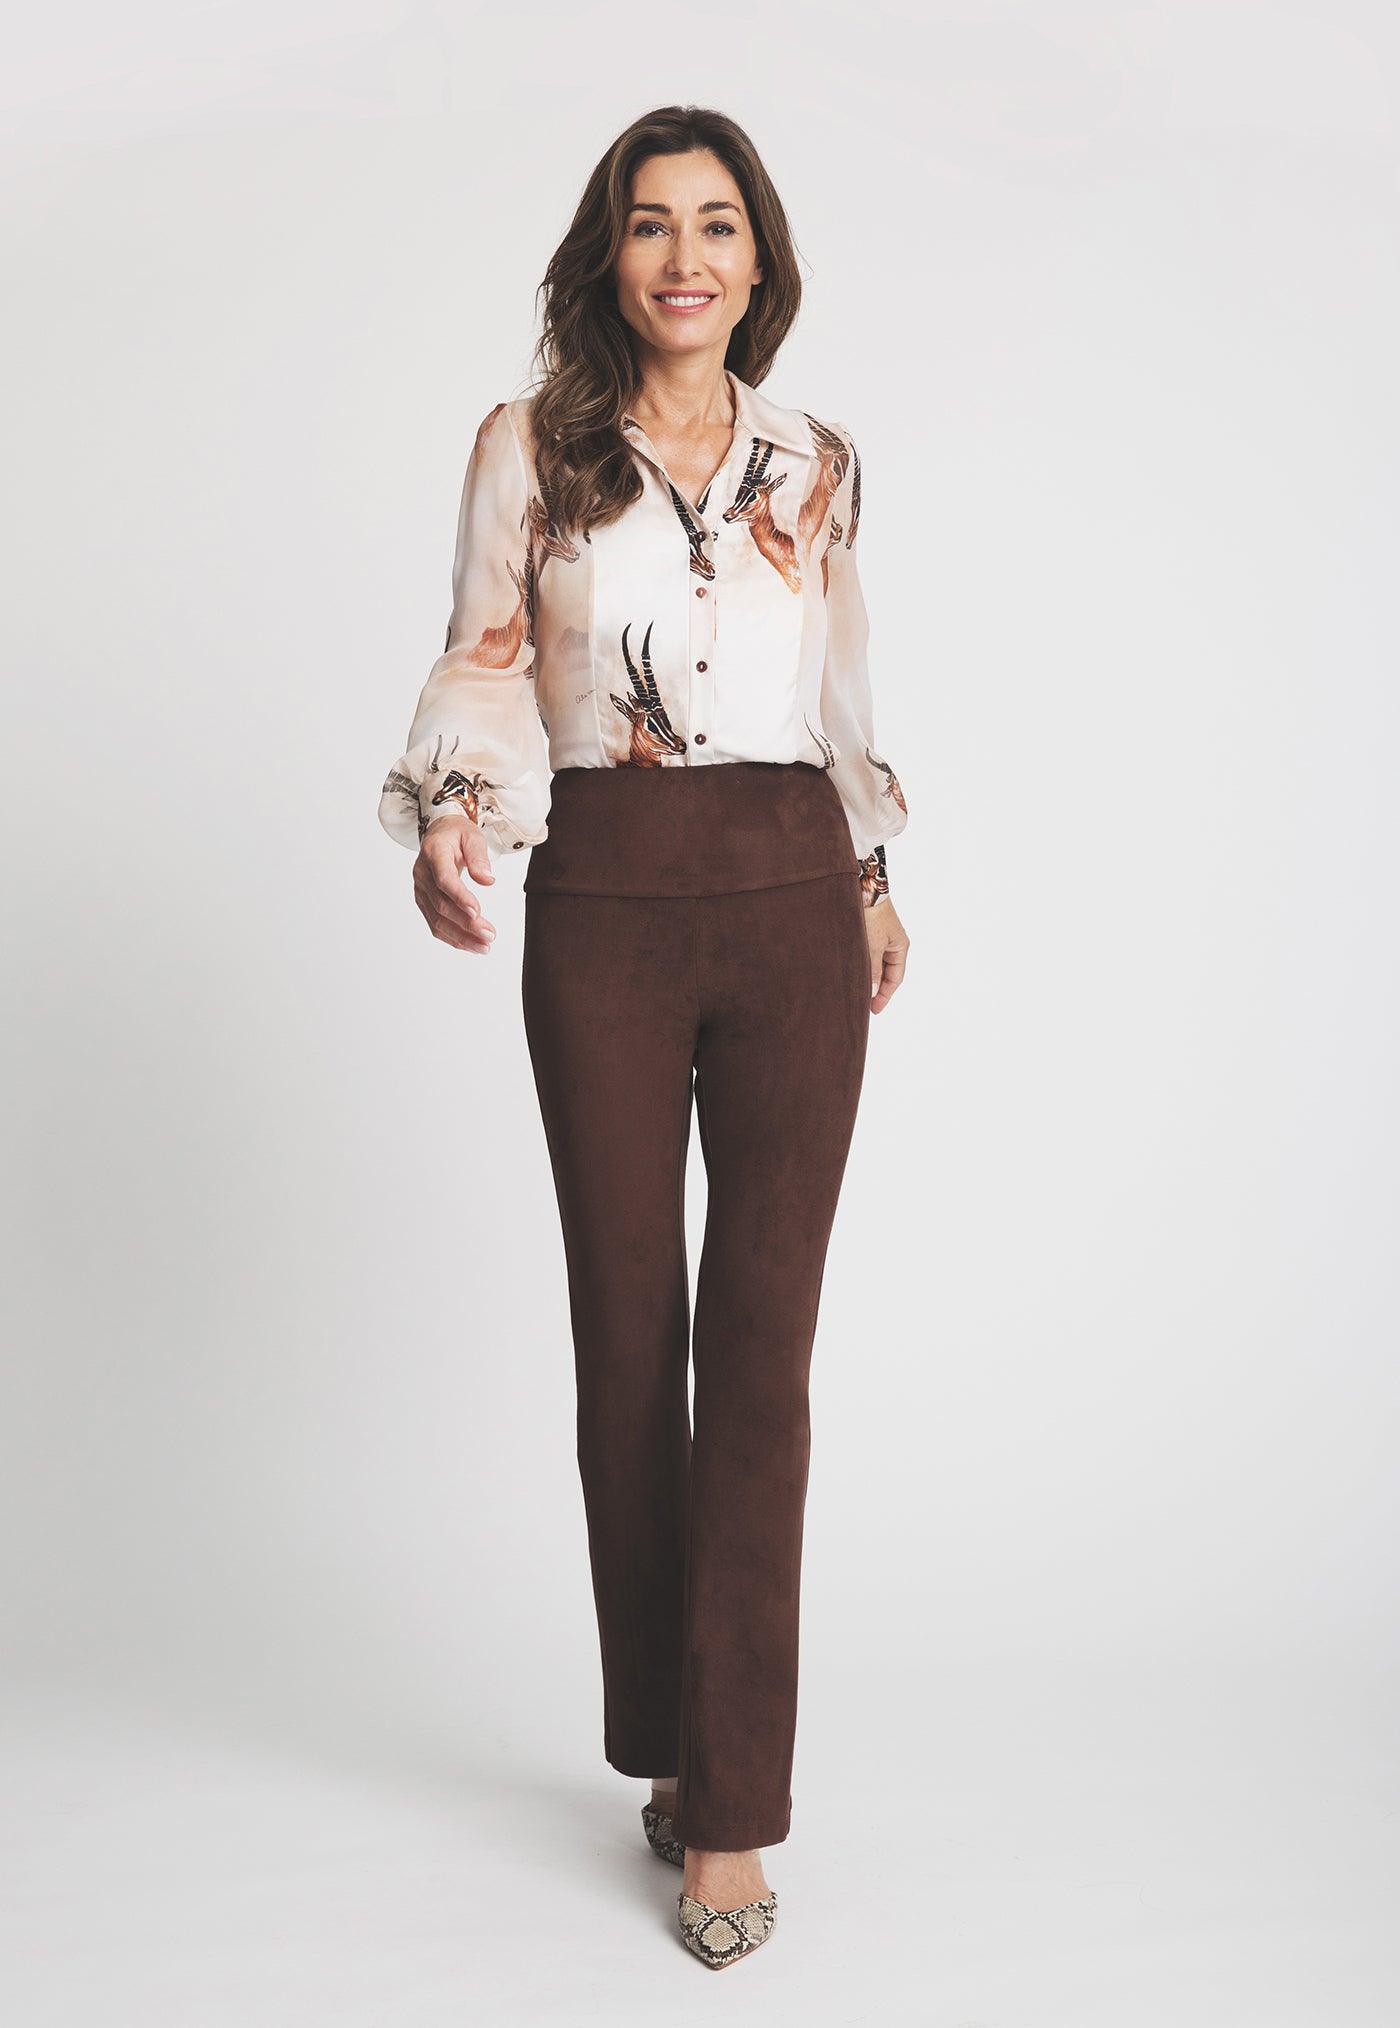 silk bellowed sleeve blouse with antelope print with brown suede pants